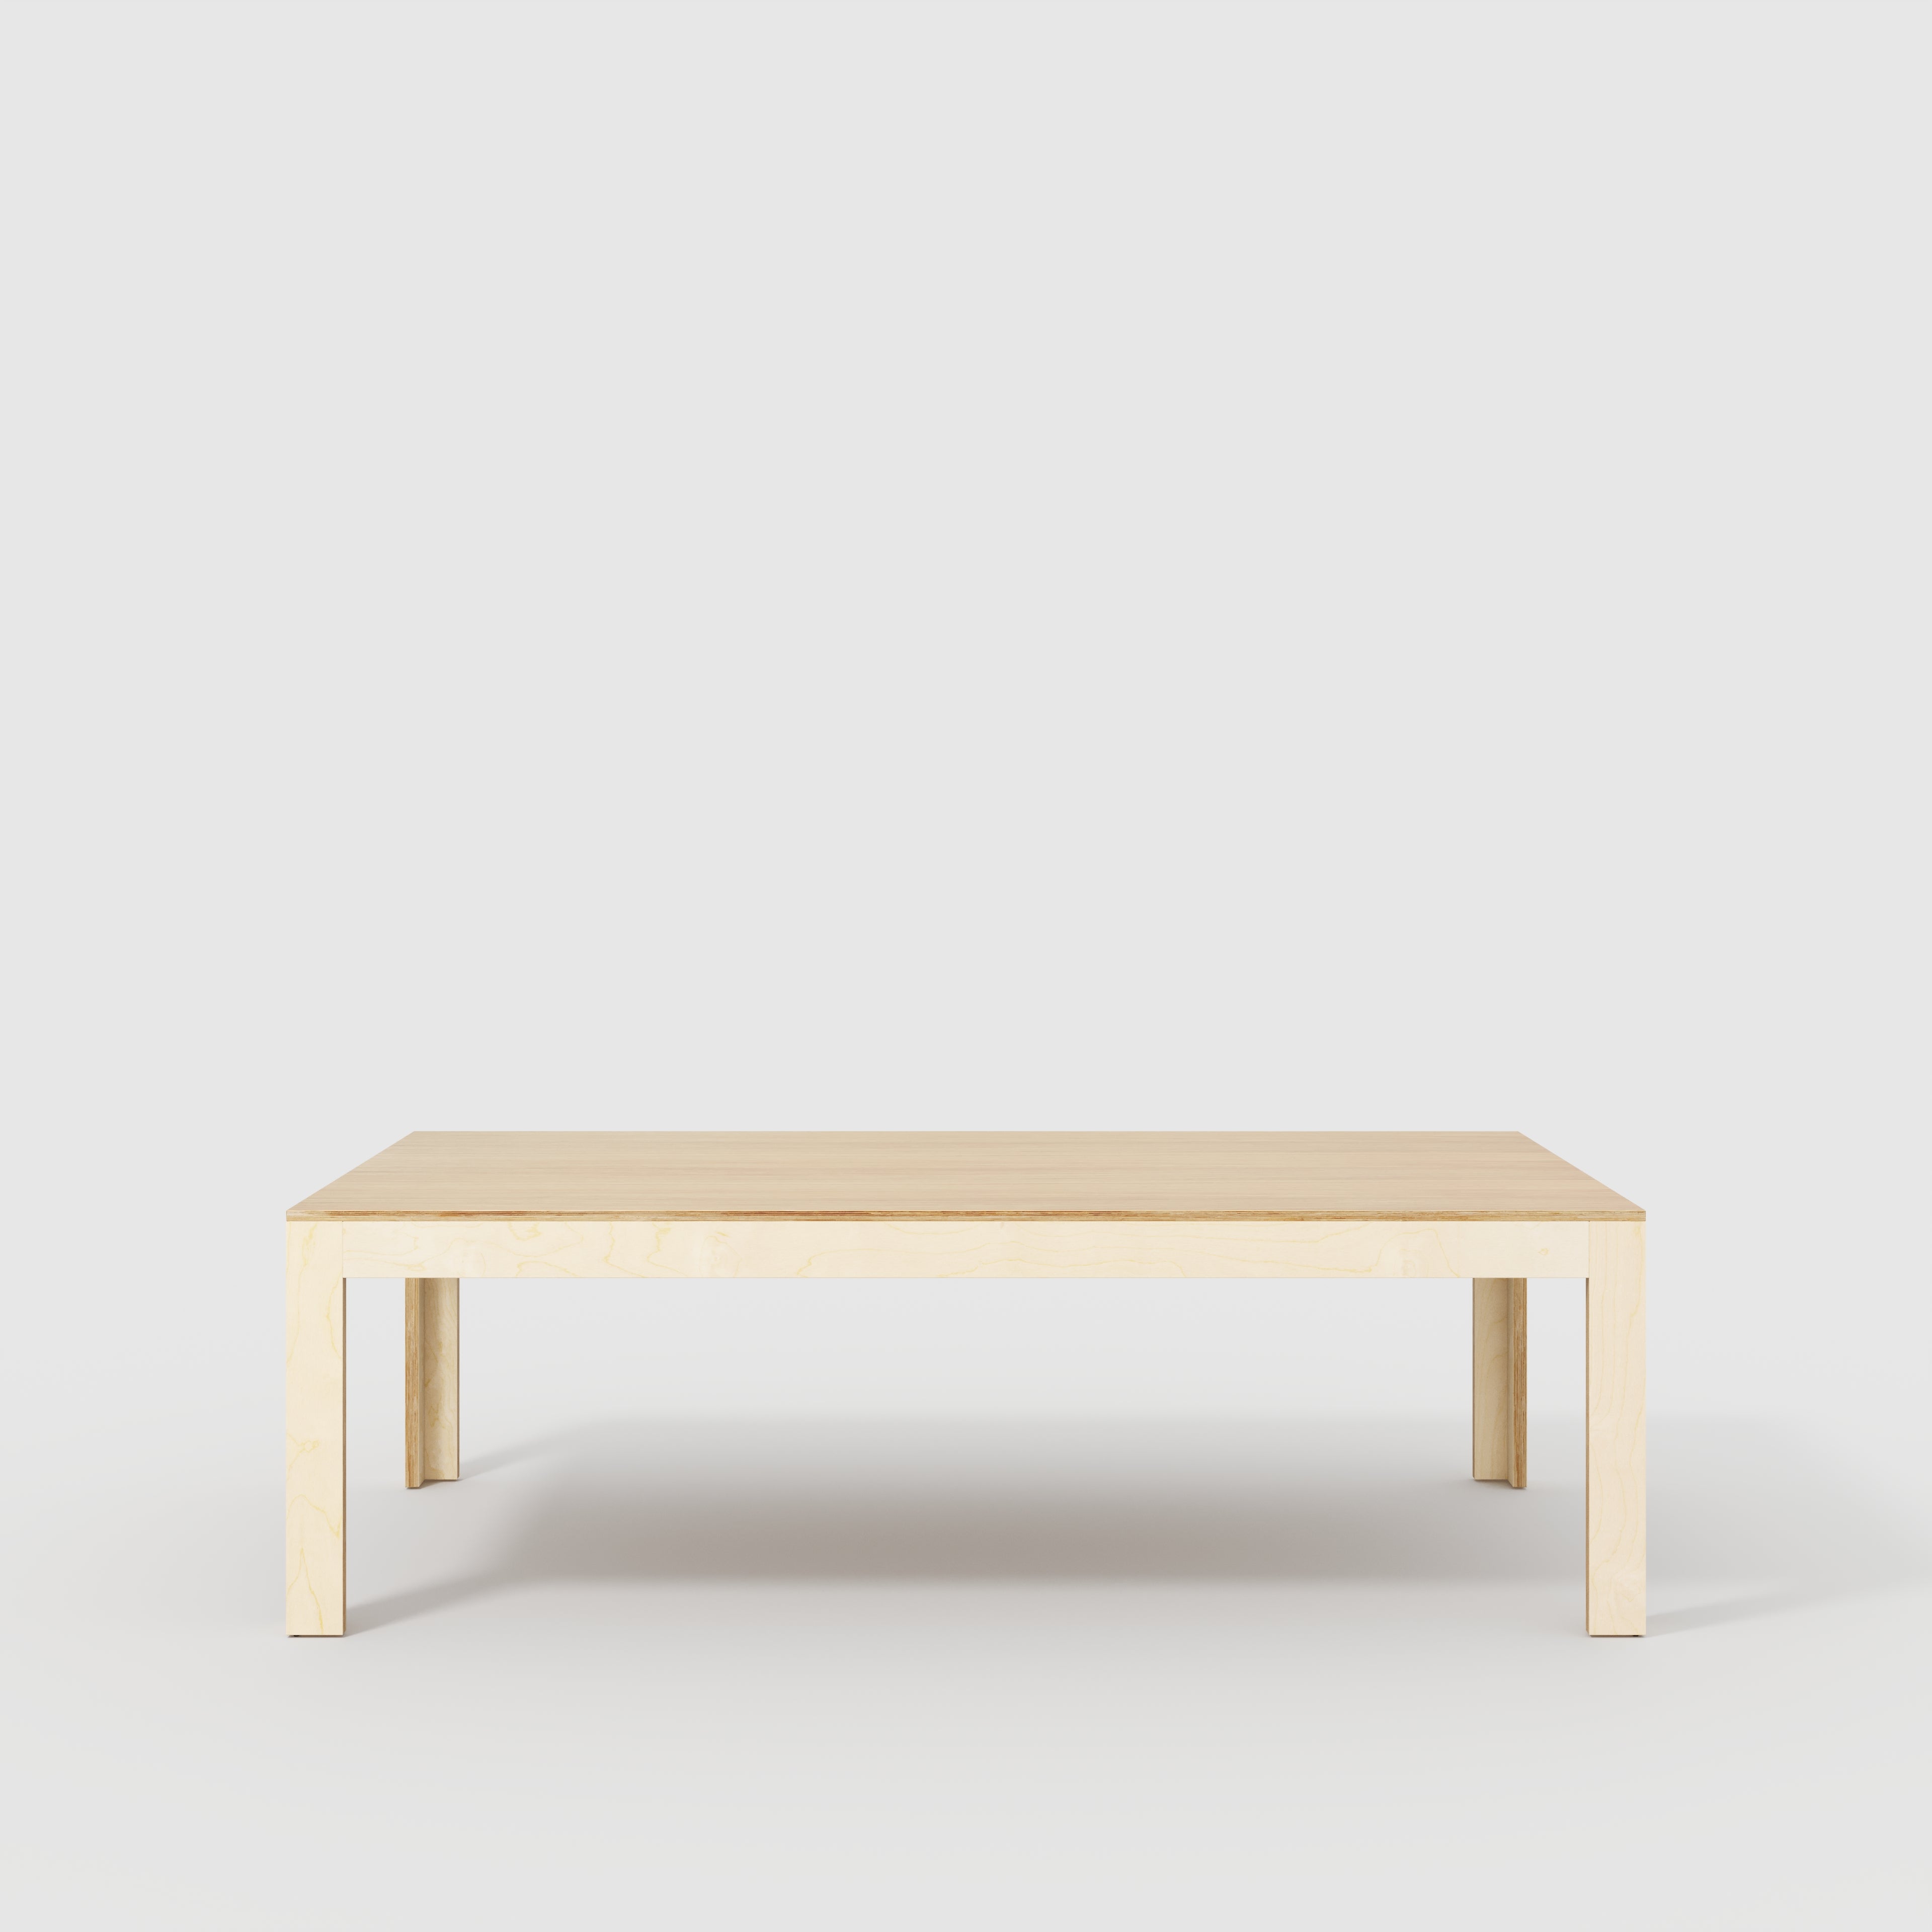 Table with Solid Frame - Plywood Oak - 2400(w) x 1200(d) x 750(h) x 750(h)